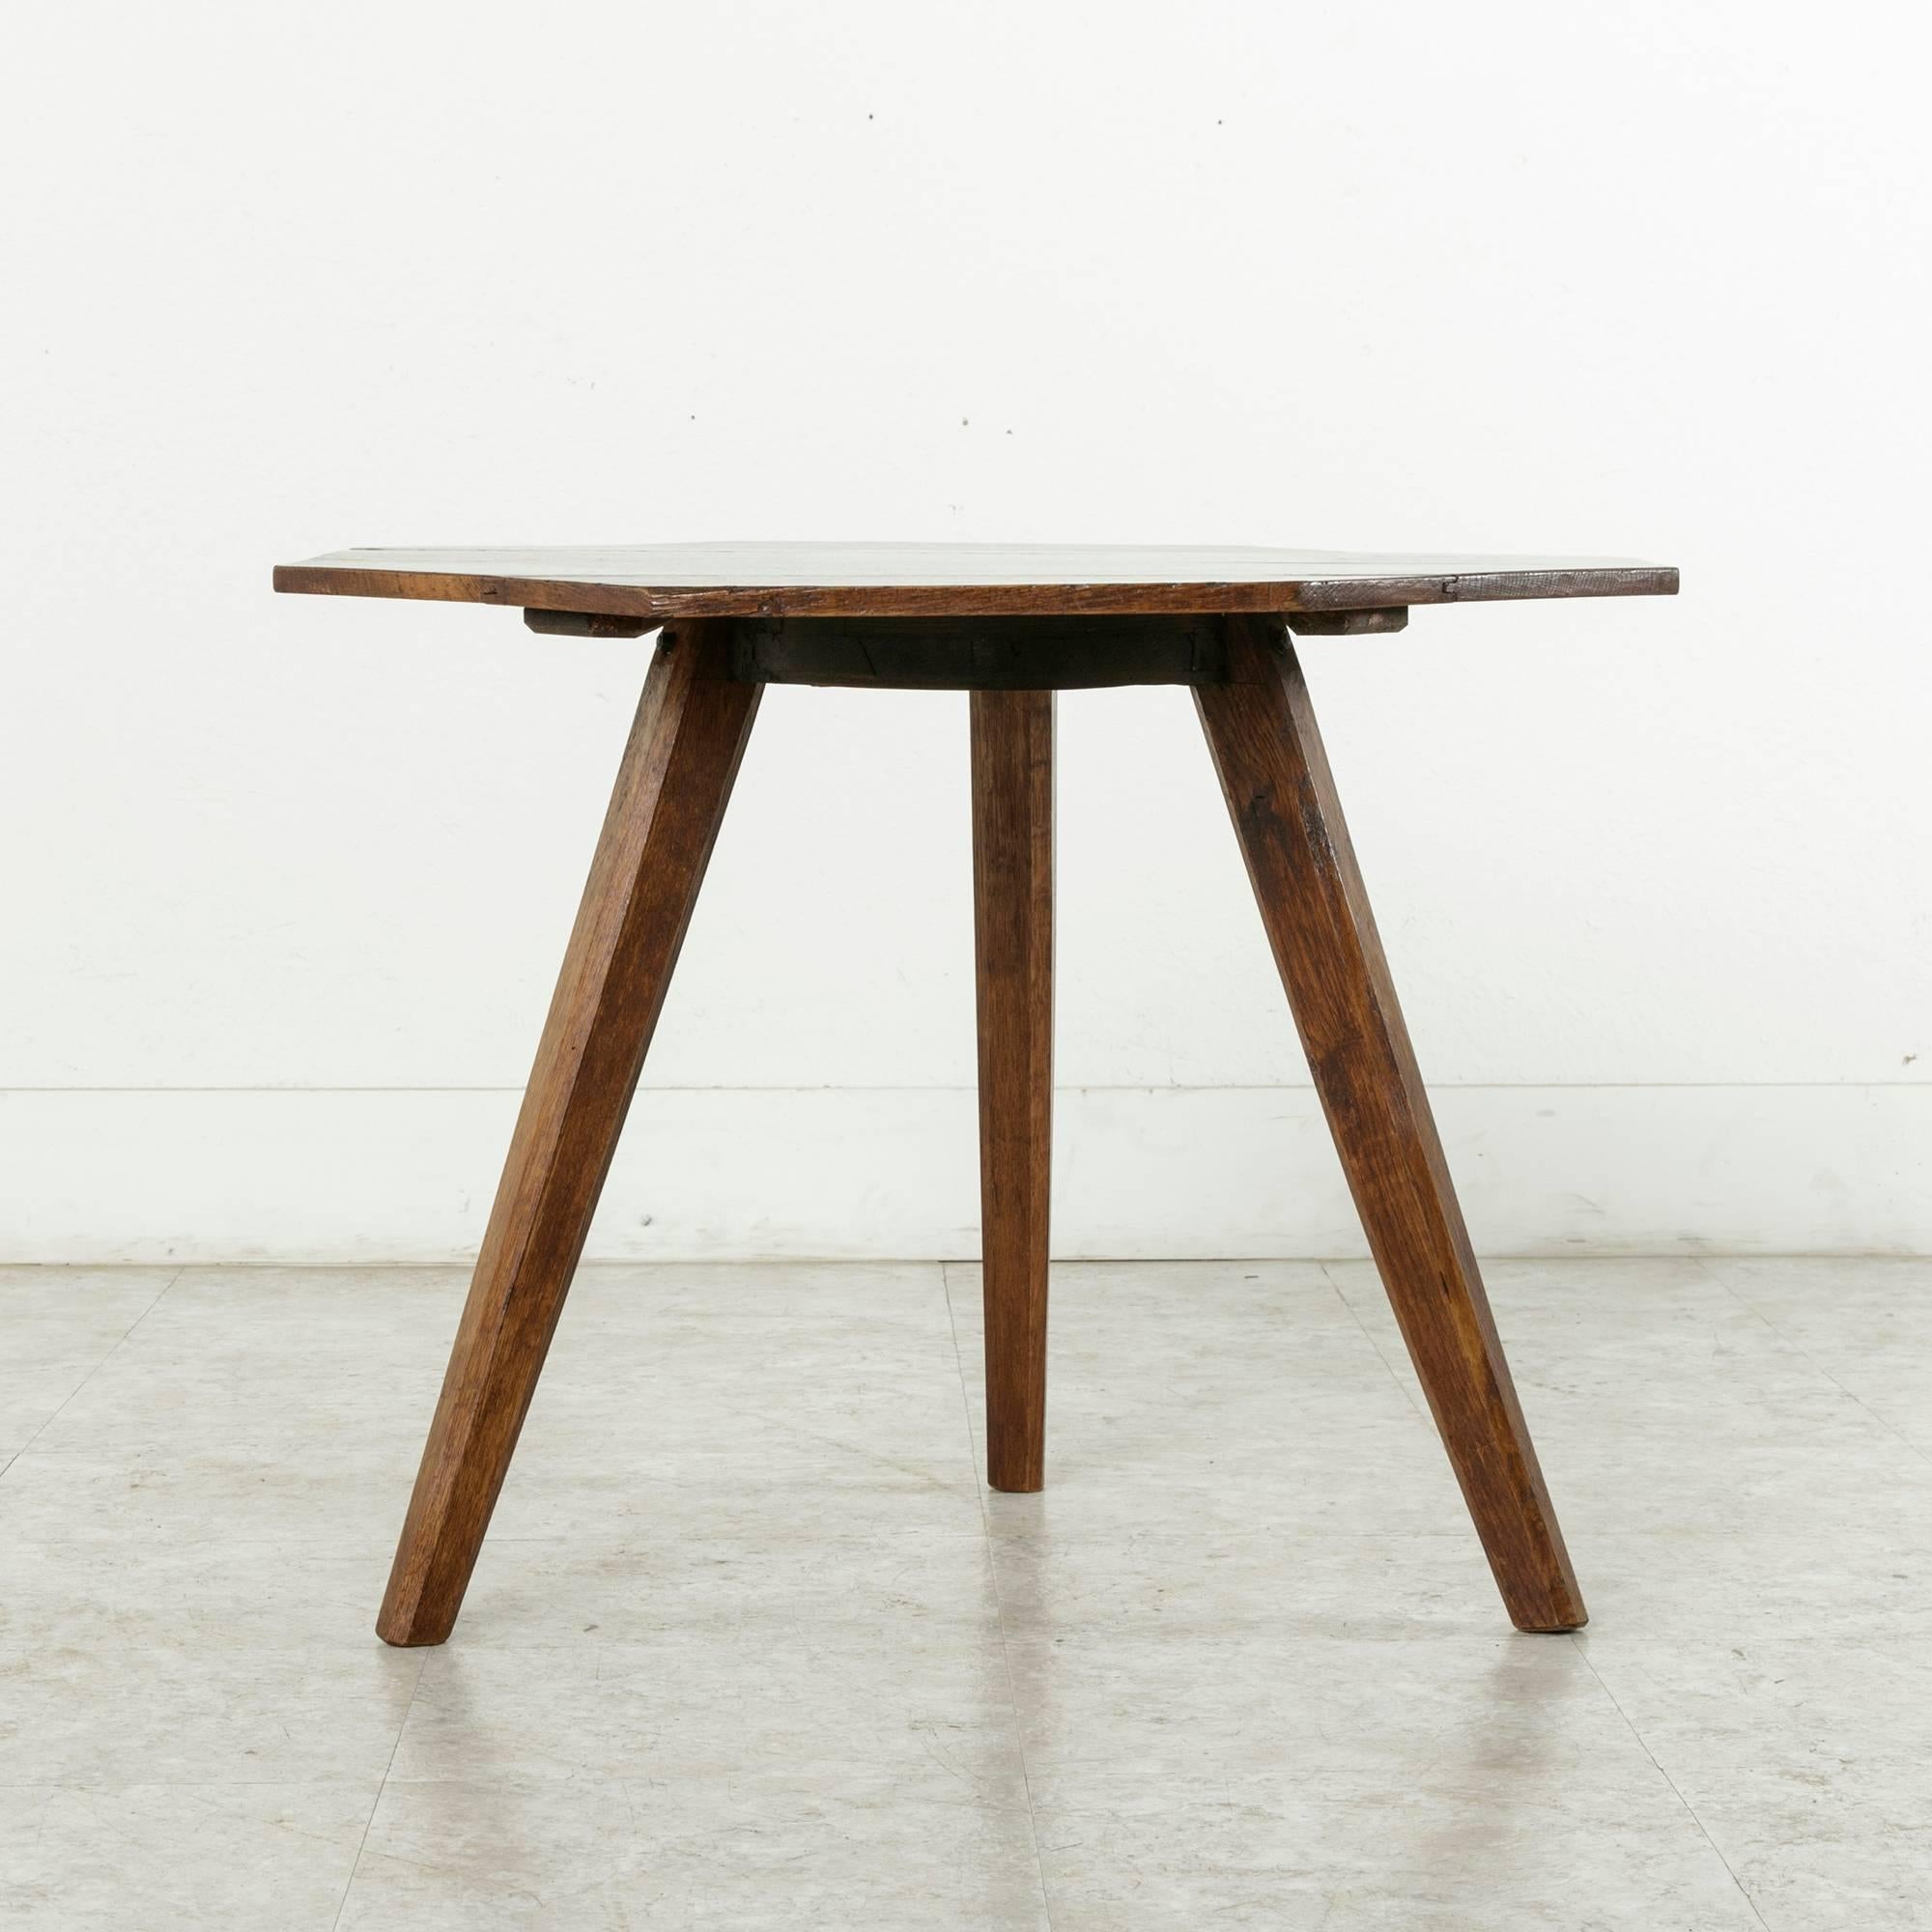 This artisan-made oak side table is constructed of an octagonal top mounted on a hand hewn tripod base with tapered legs. Found in Normandy, France, its 22-inch height makes it ideal between two chairs, next to a sofa, or as a unique coffee table,